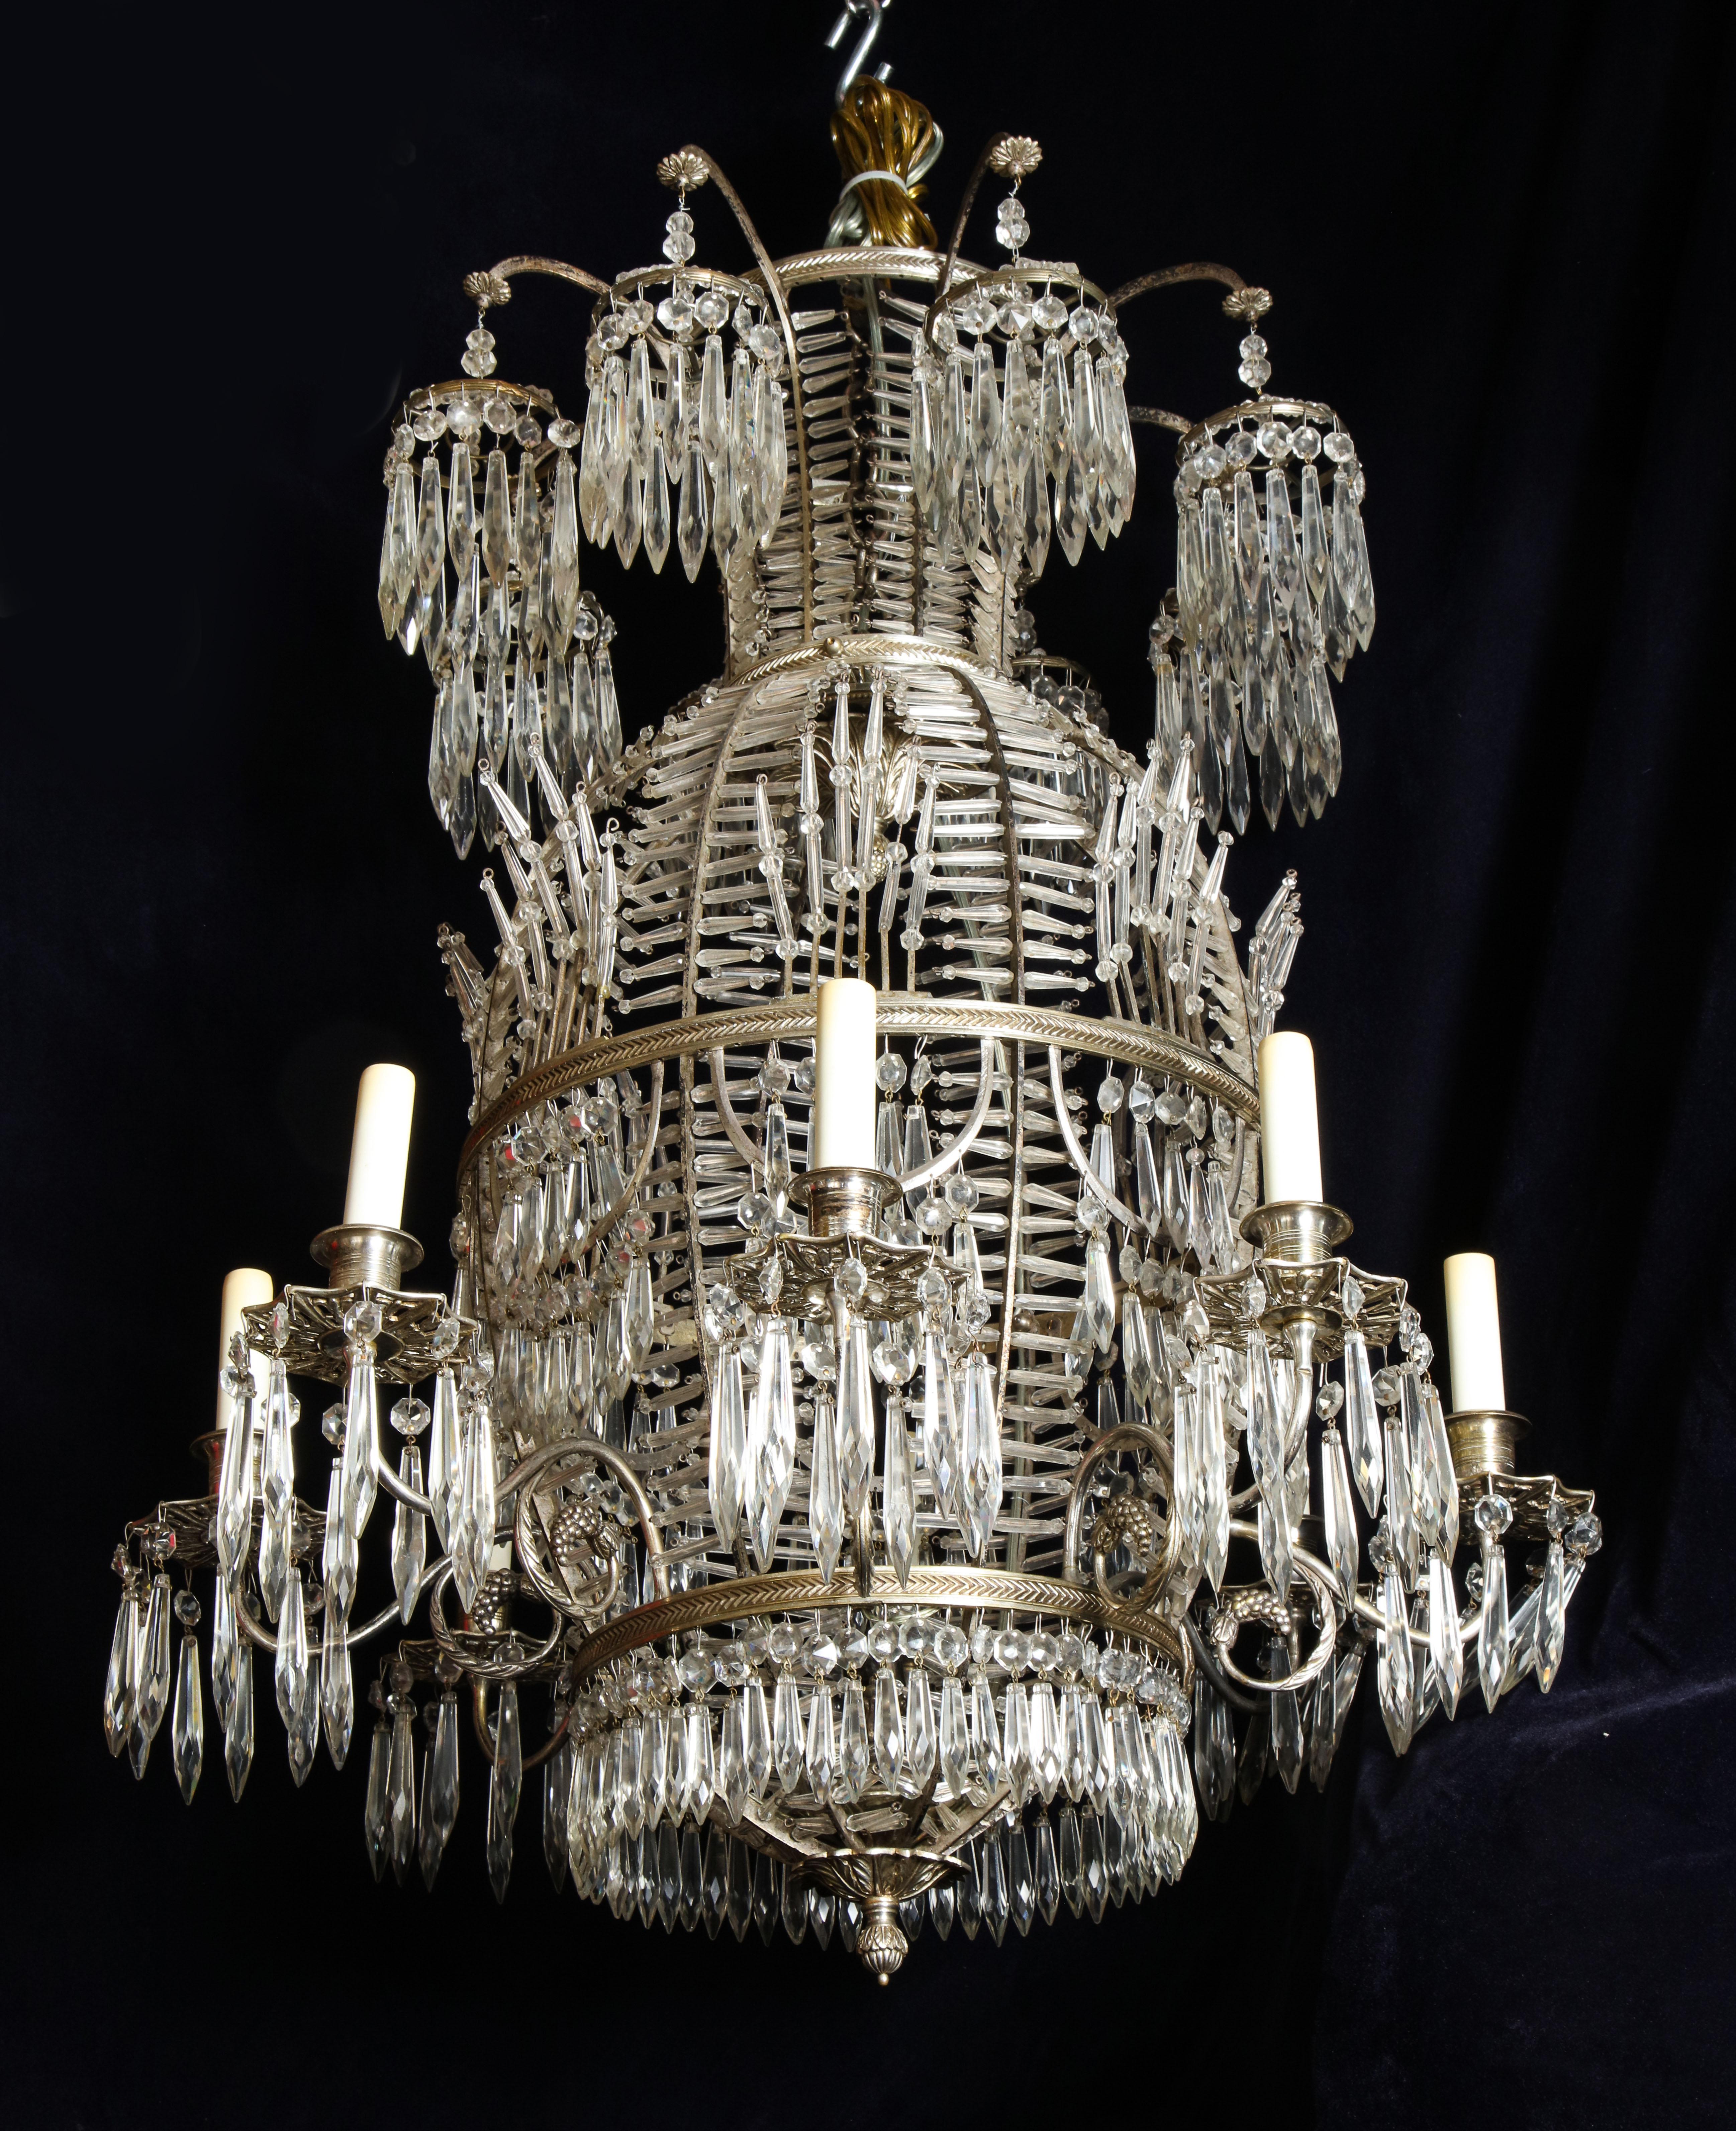 A very unique antique Russian neoclassical balloon form silvered bronze, cut crystal and glass multi light chandelier of superb quality. This rare chandelier is embellished with silvered bronze arms, cut crystal prisms and further adorned with